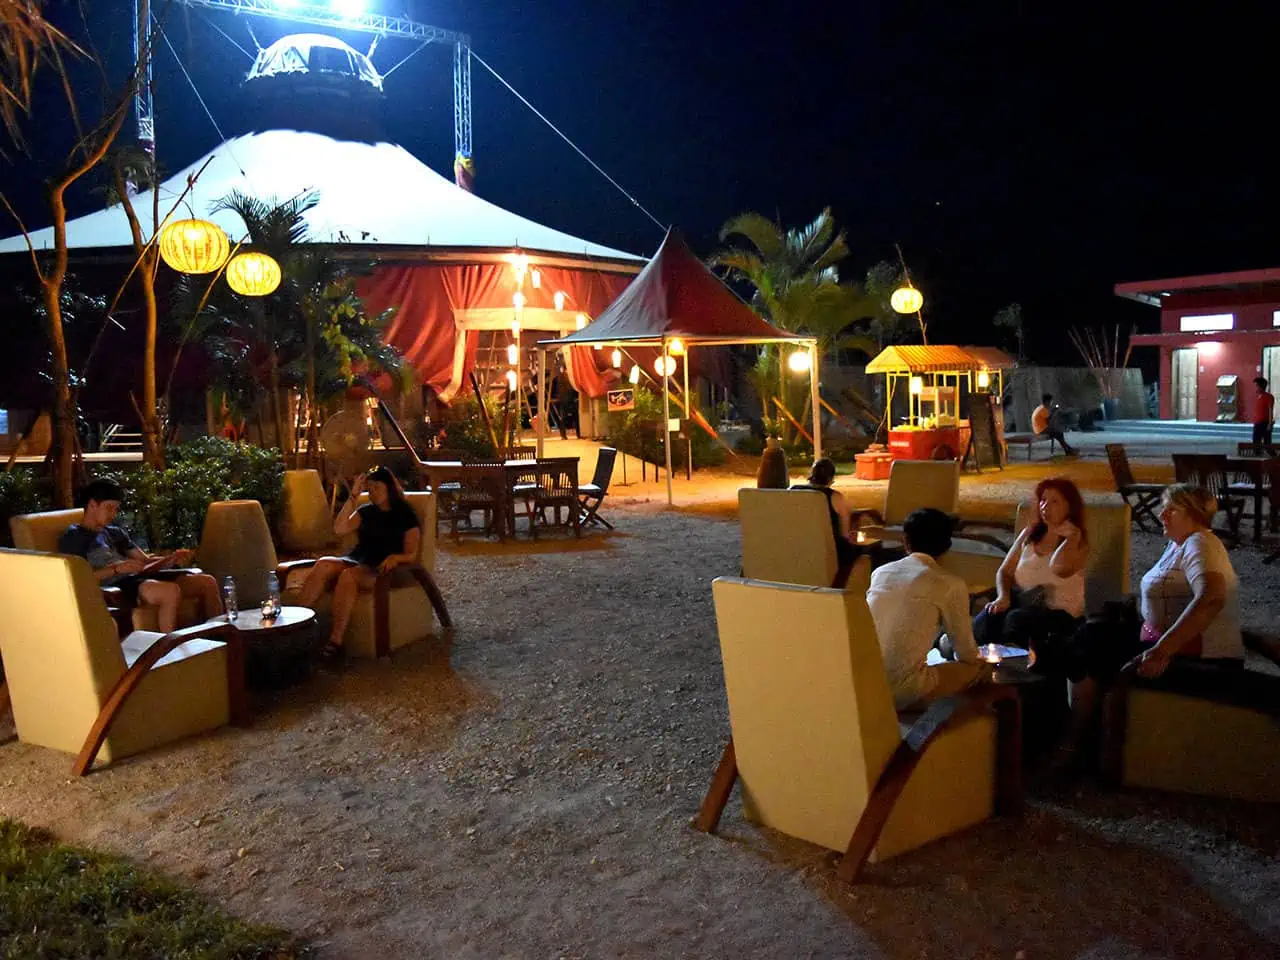 Siem Reap nightlife, dining and drinks at Phare Circus Cafe - guests seated in lounge chairs under colorfully lit iconic red circus big top